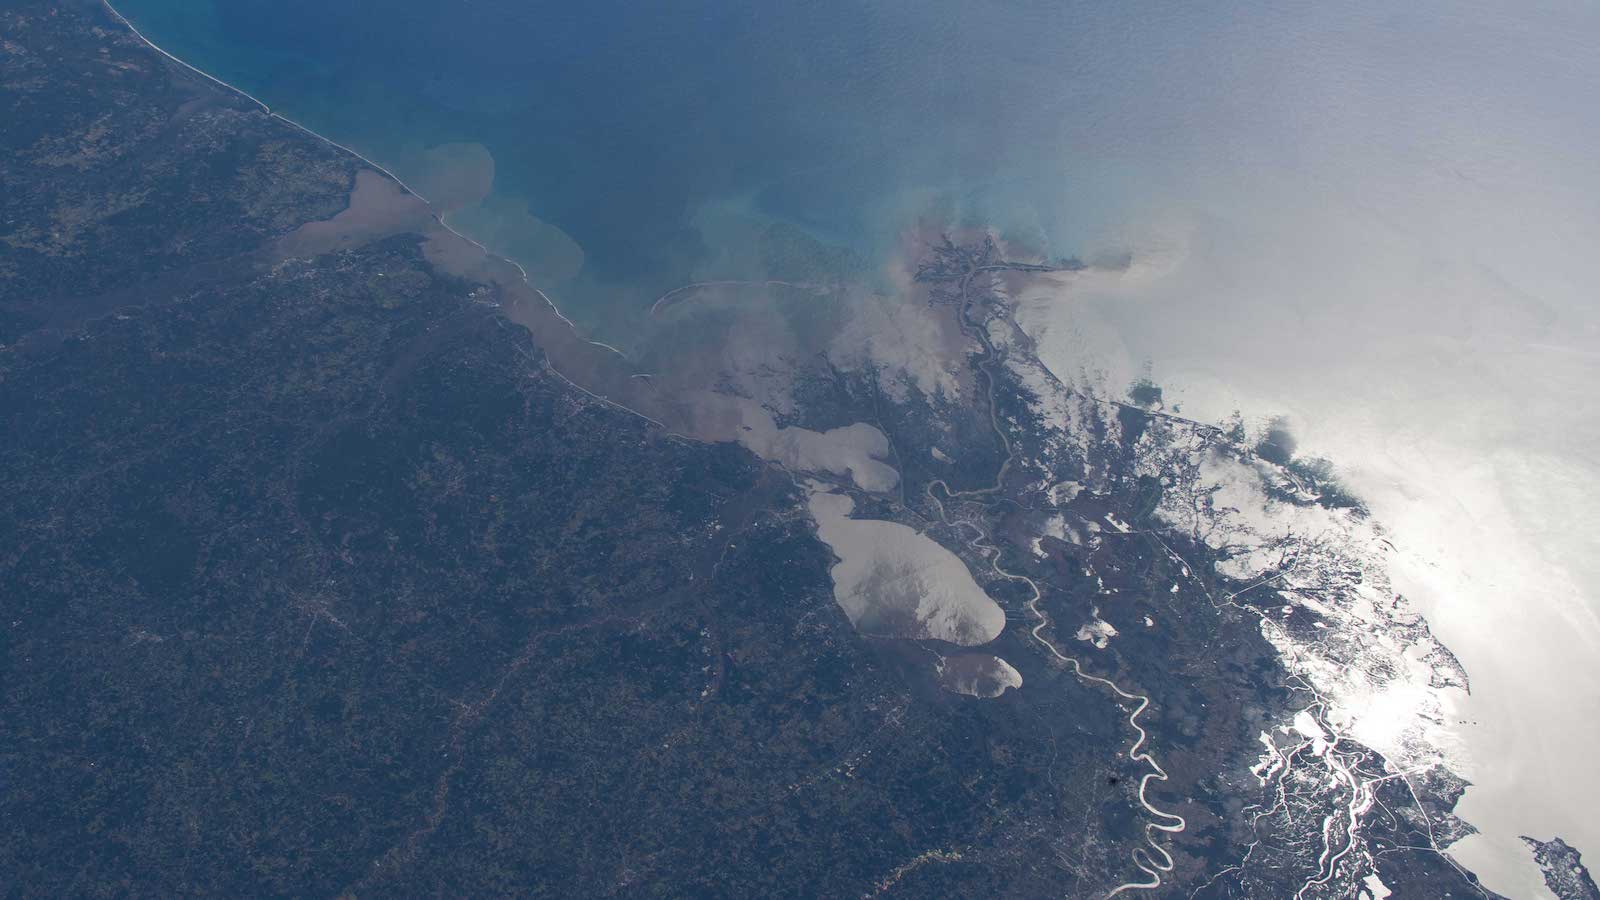 slide 5 - NASA Uses 30-Year Satellite Record to Track and Project Rising Seas